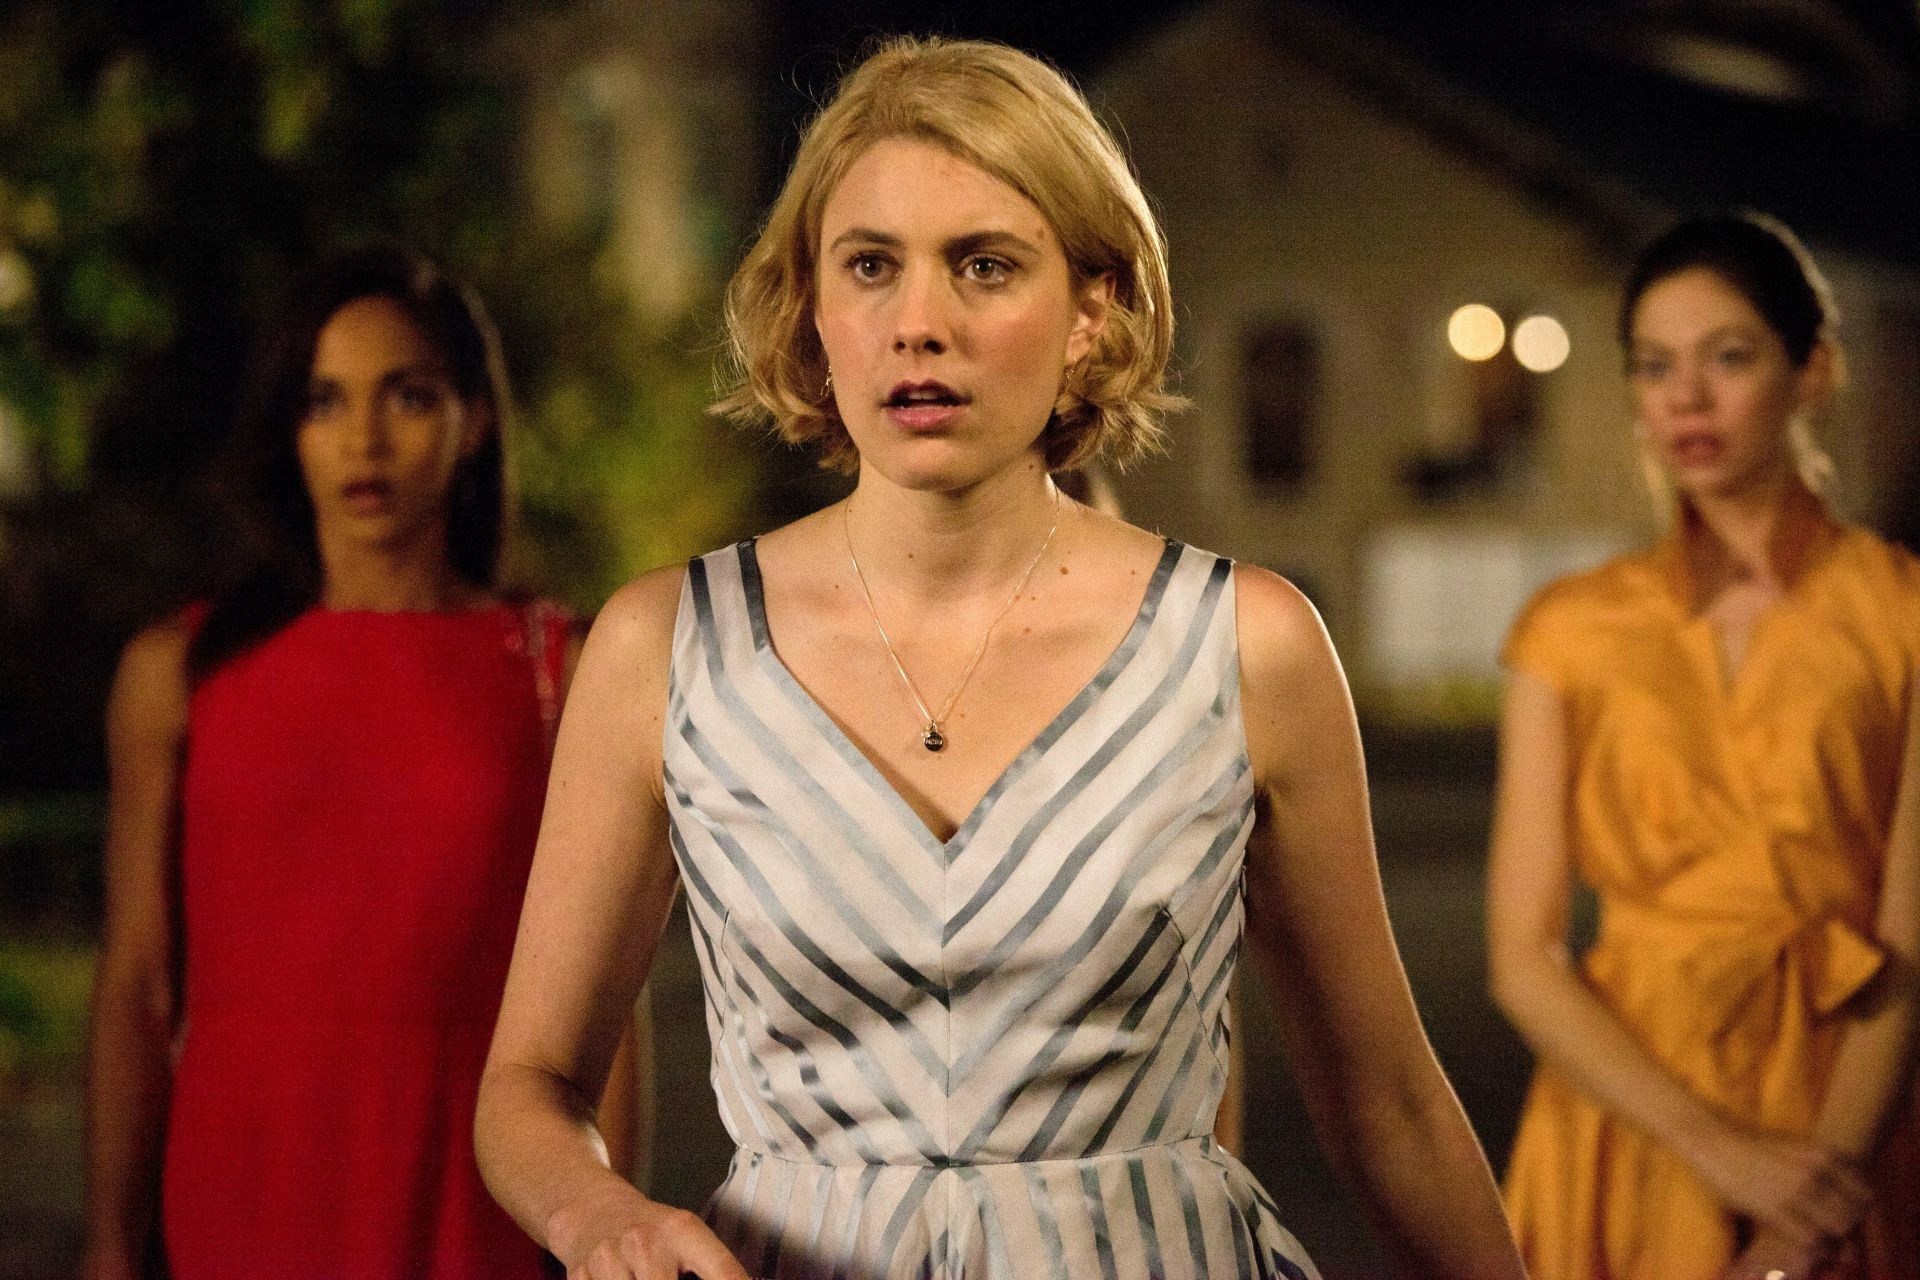 Megalyn Echikunwoke, Greta Gerwig and Analeigh Tipton in Sony Pictures Classics' Damsels in Distress (2012). Photo credit by Sabrina Lantos.